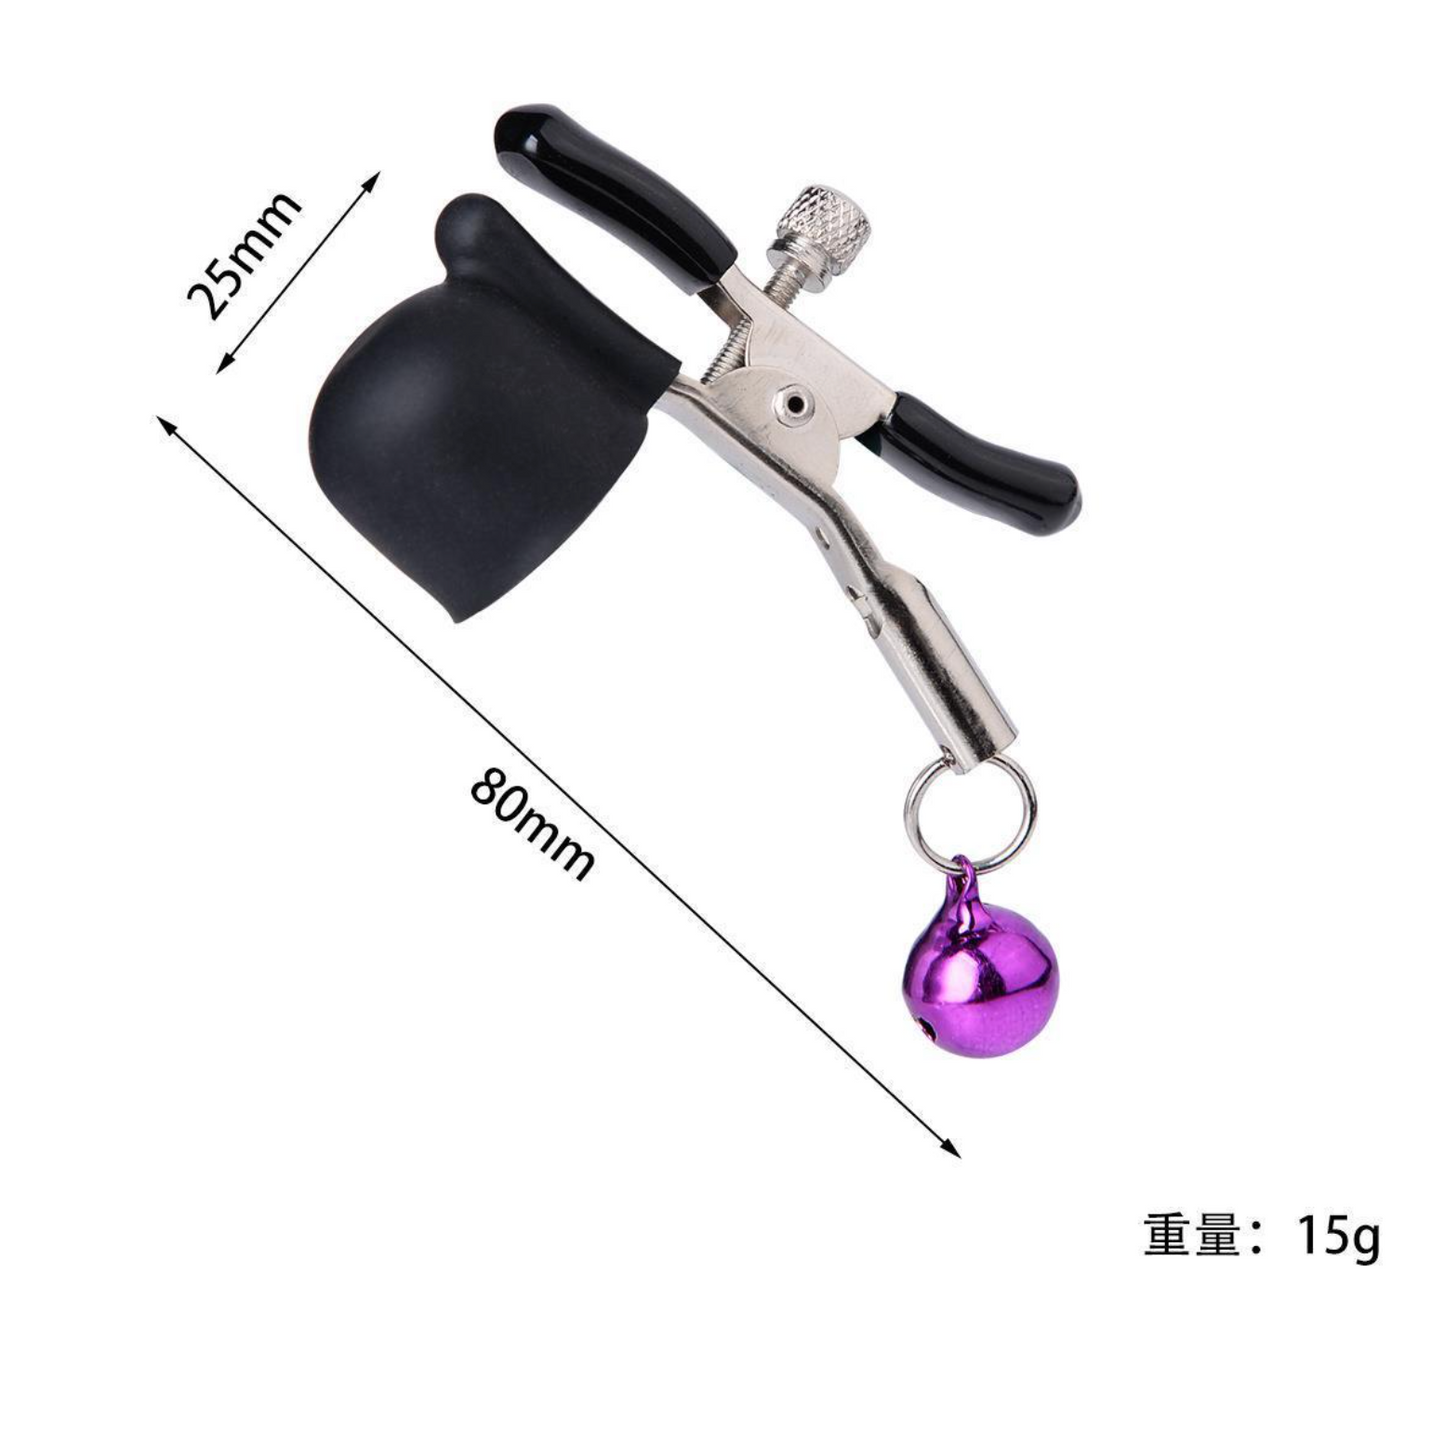 Quick Escpae Nipple wire vibrator v3 (1 Pair)Battery Included 乳夹跳蛋V3 一对1492